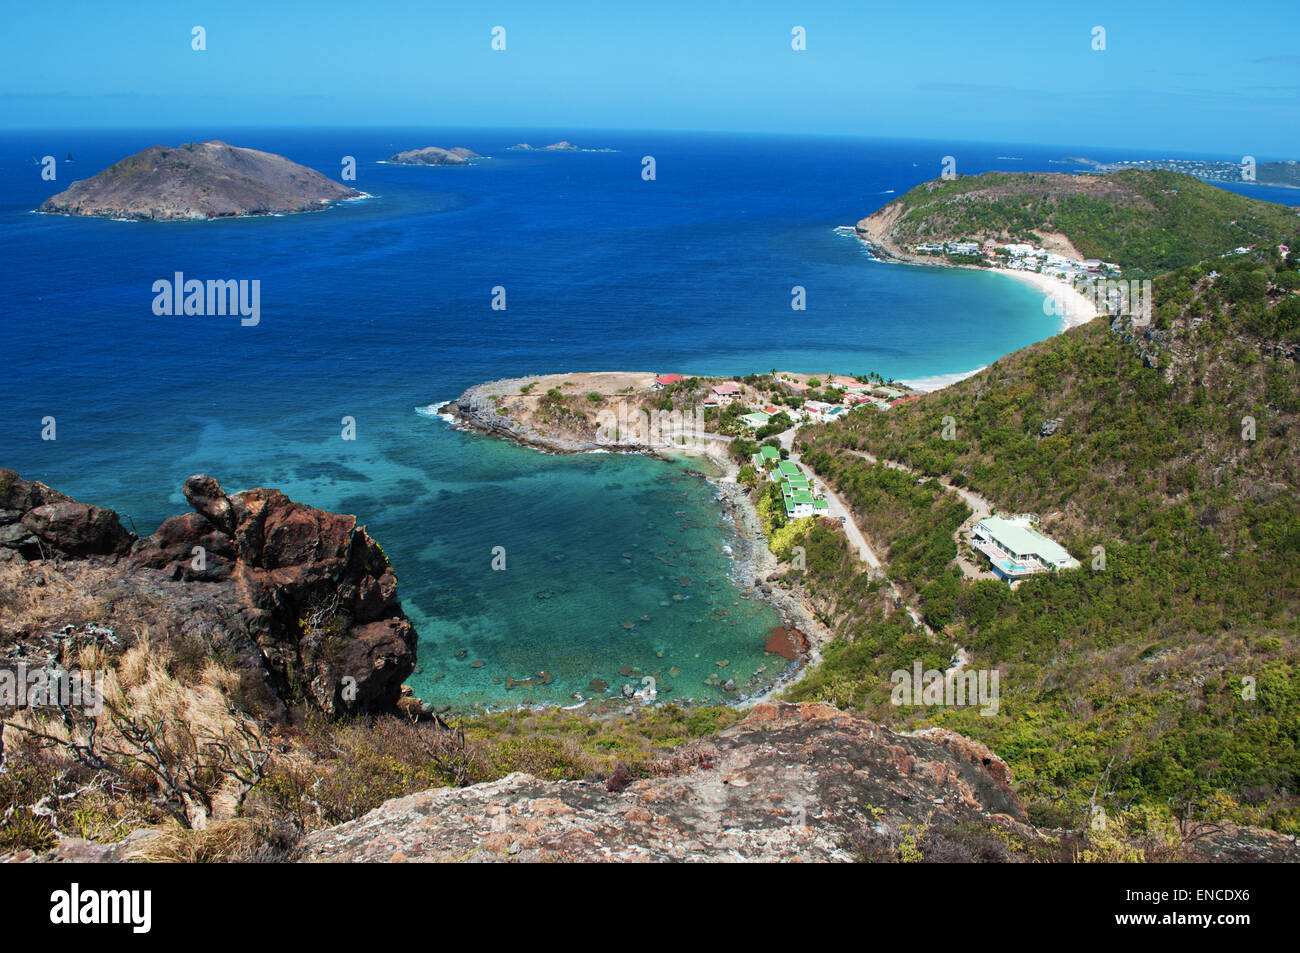 Beaches of St. Barts in the West Indies Stock Photo - Image of beach,  indies: 112043212